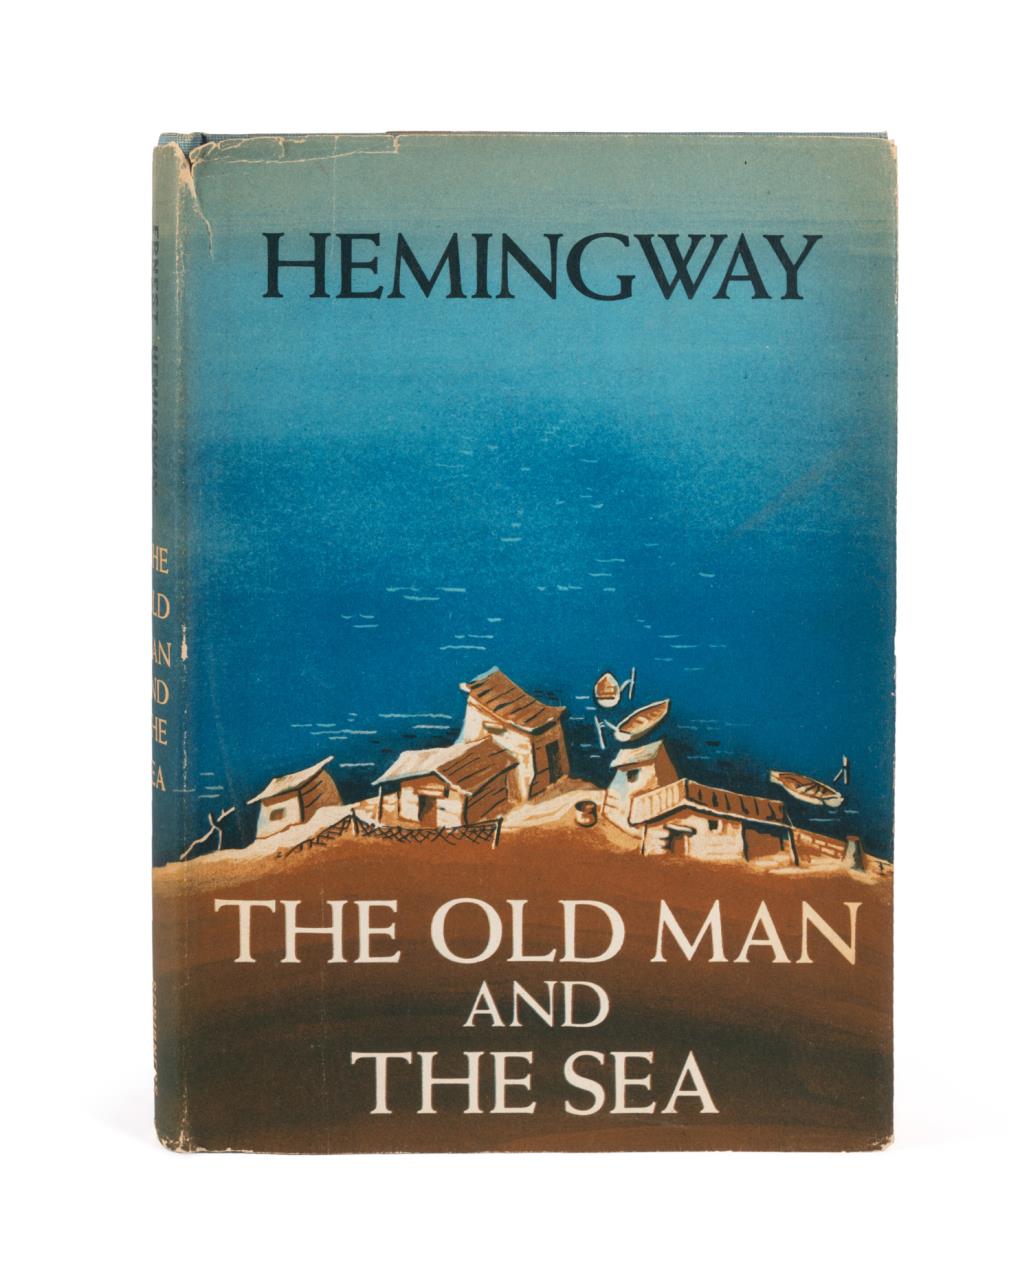 ERNEST HEMINGWAY 'THE OLD MAN AND